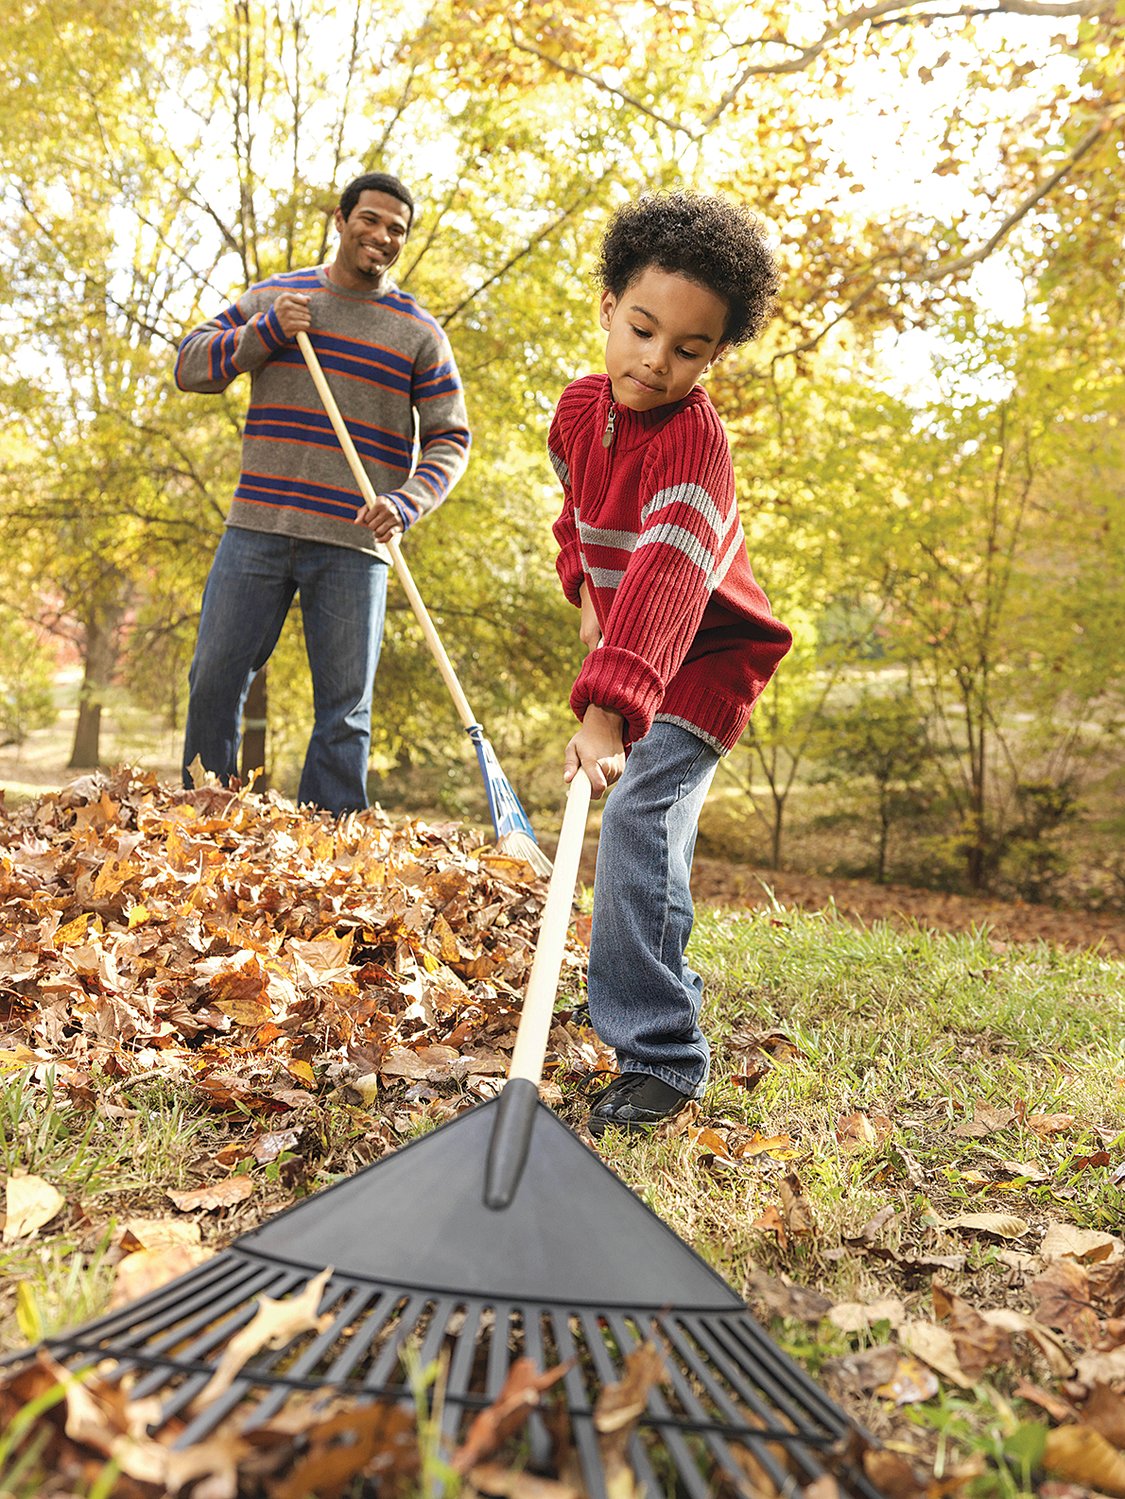 Most people feel compelled to do a big fall cleaning that removes all the fallen leaves and debris. One landscaping expert prefers to wait until the spring. He says the leaves provide natural ground cover and insulation through the winter and can be cleaned in the spring when everything comes back to life.